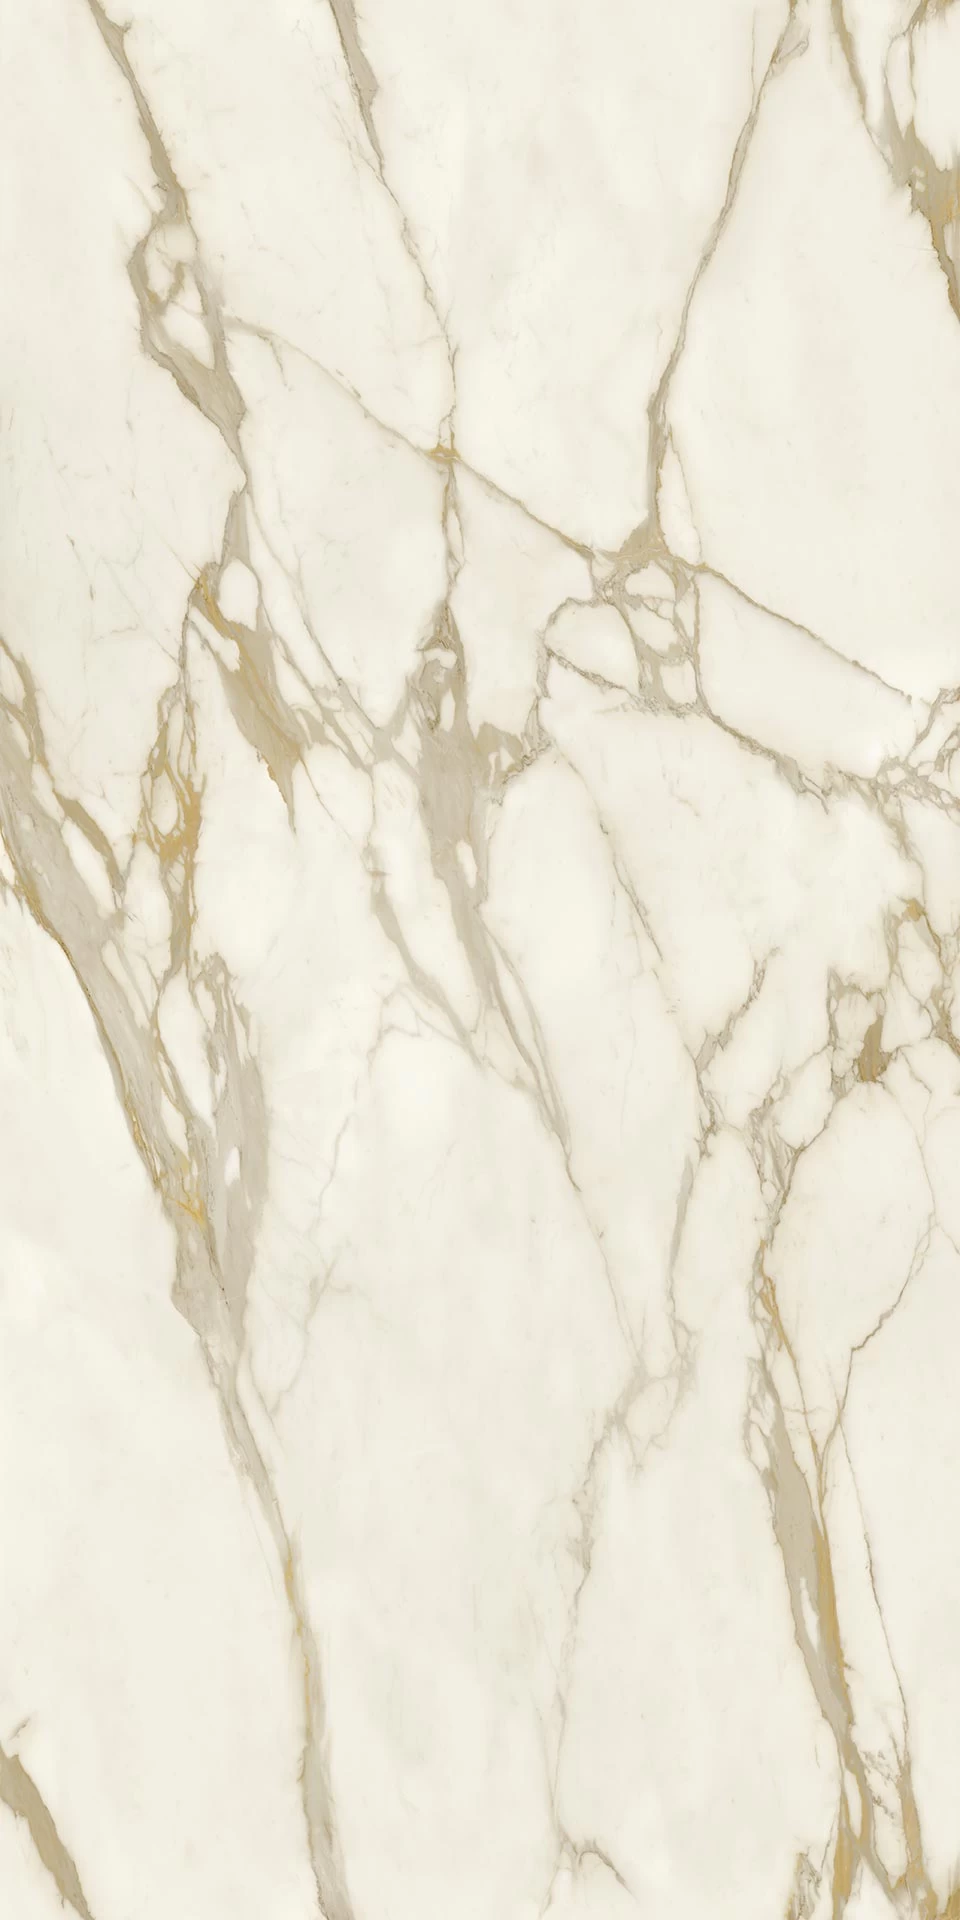 Calacatta Gold large size porcelain stoneware for indoor spaces - Atlas Plan